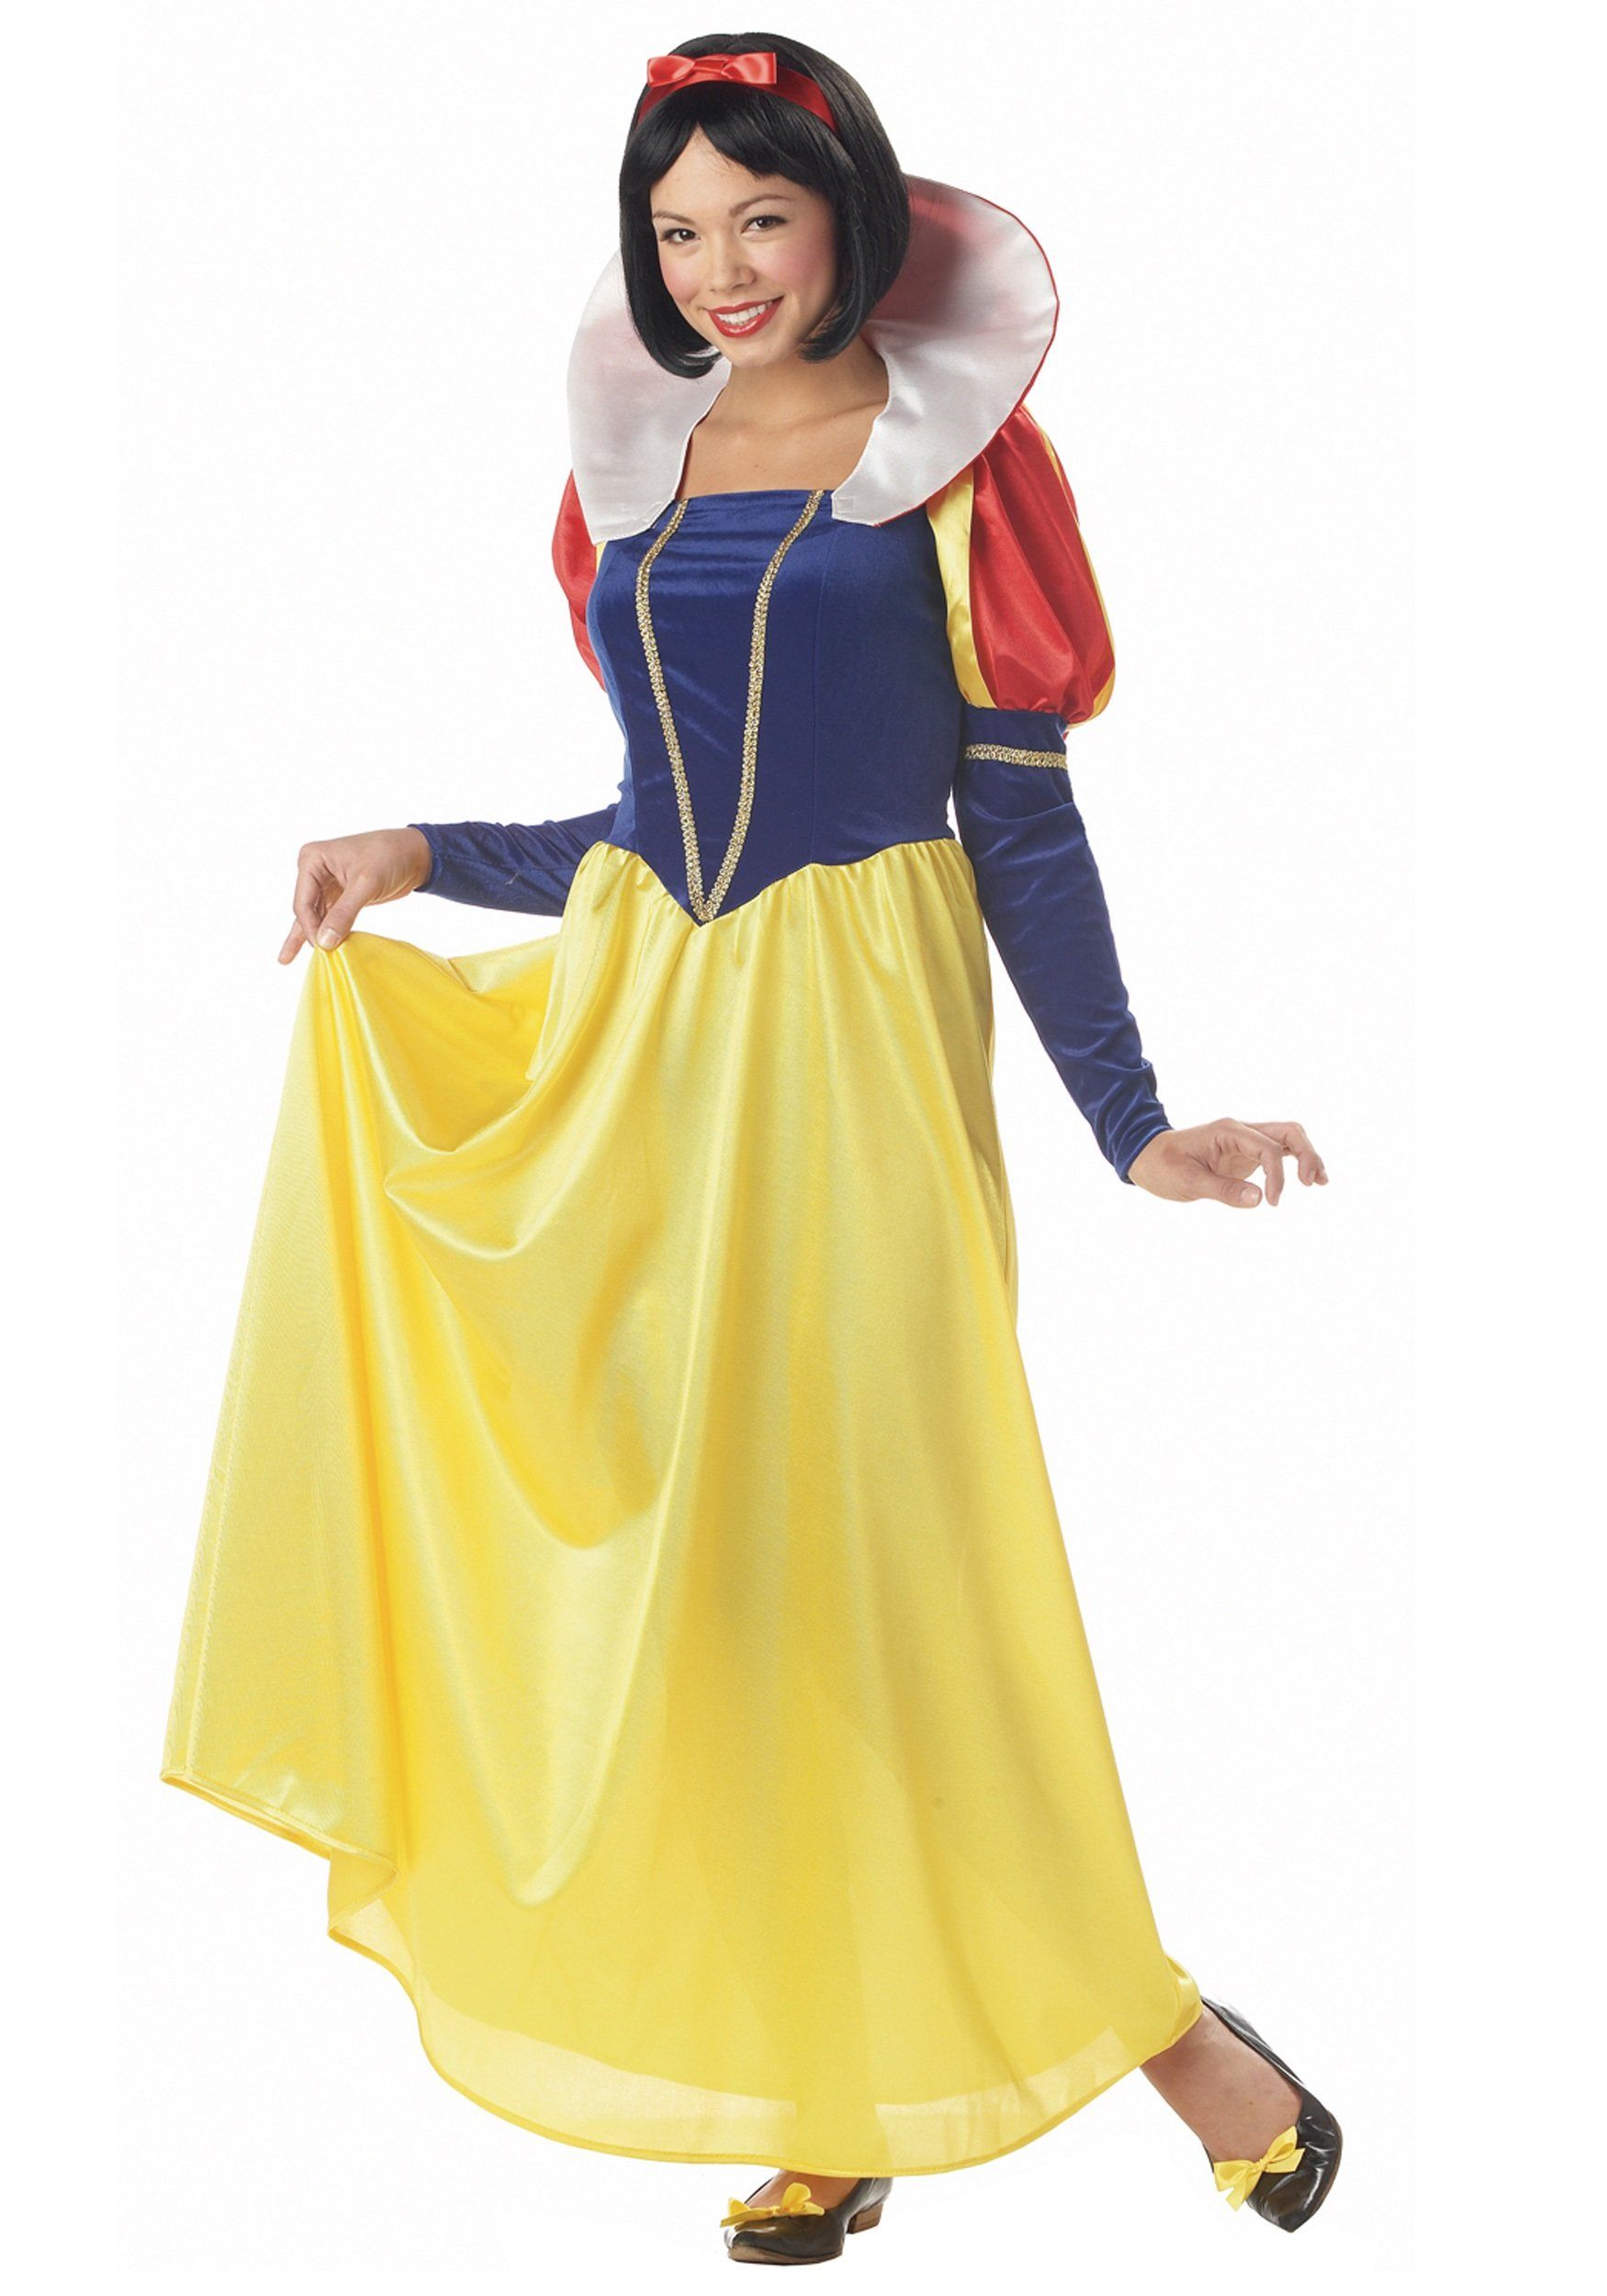 Snow white costumes for adults